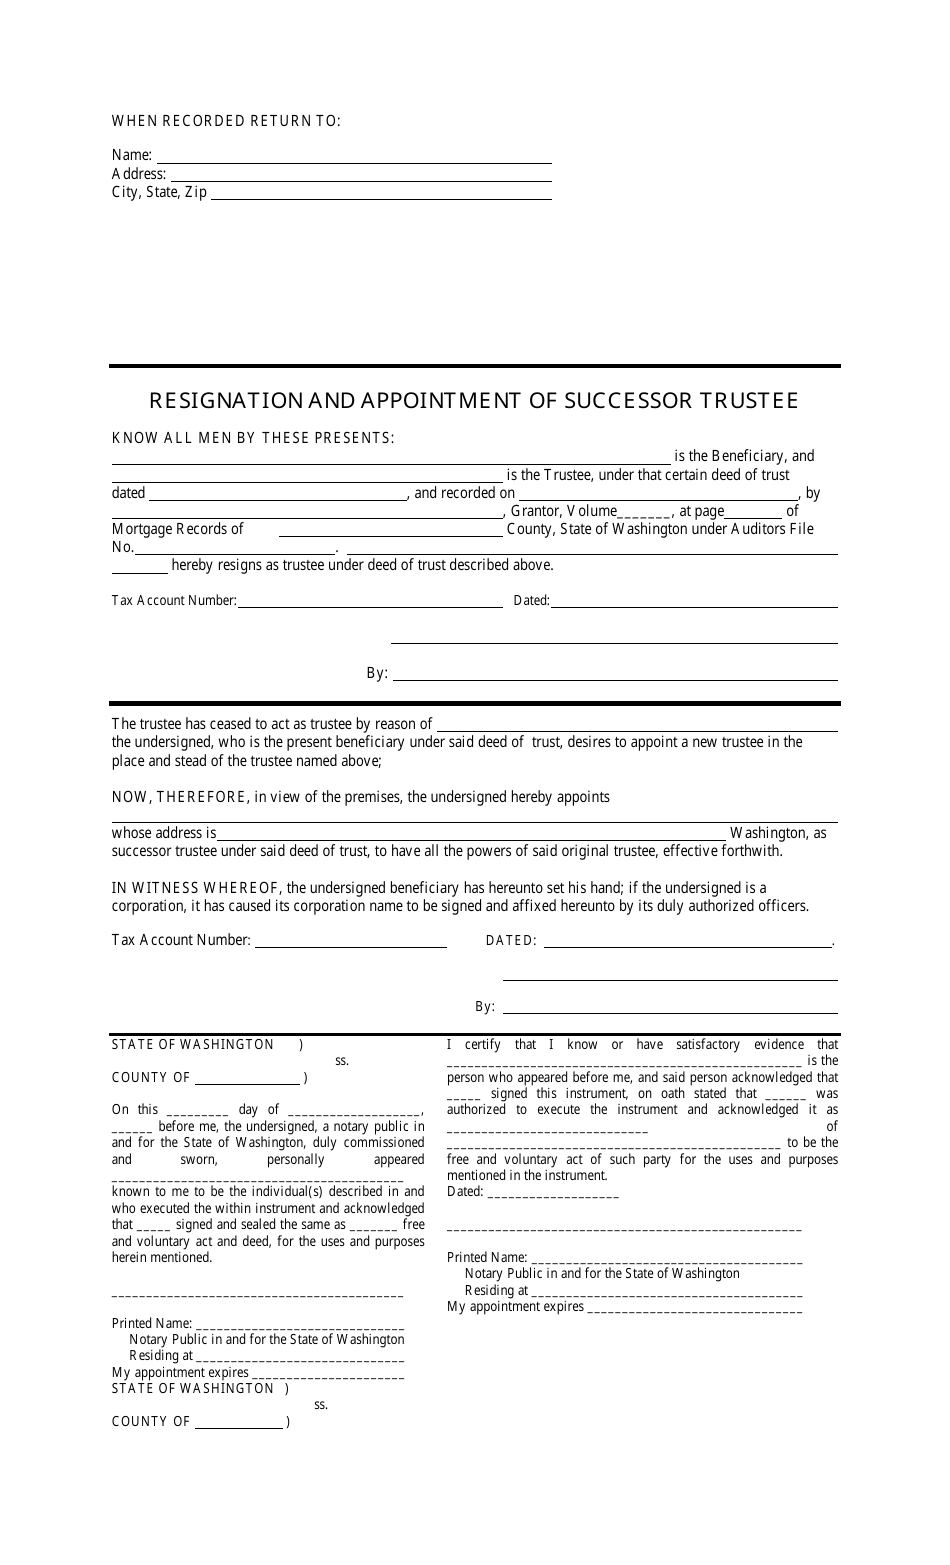 Washington Resignation And Appointment Of Successor Trustee Download